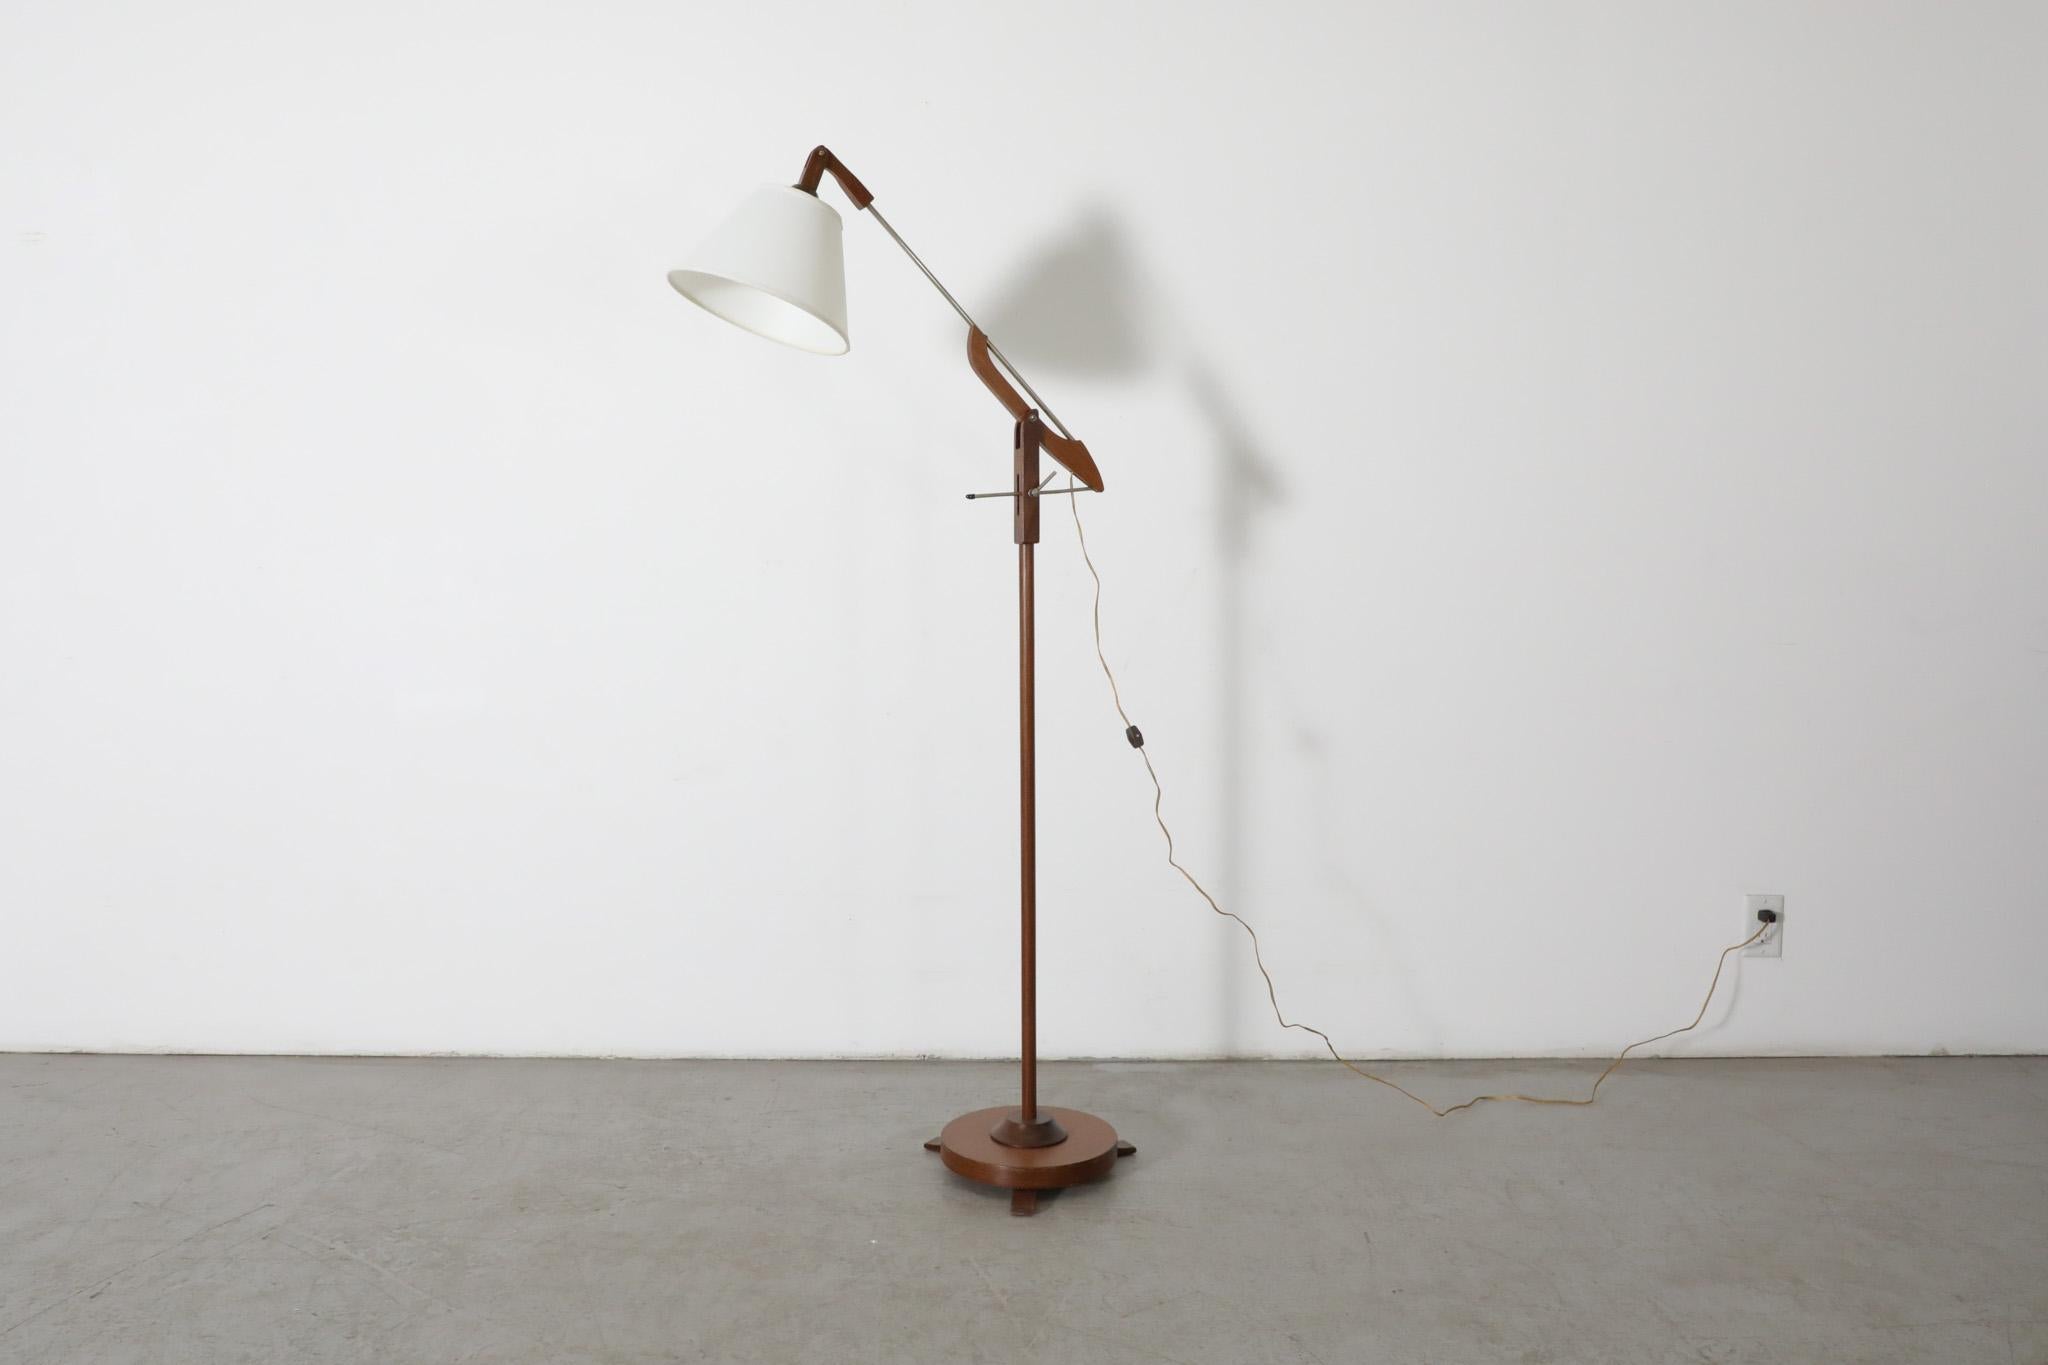 Mid-Century or earlier teak cantilevered floor lamp, likely by Le Klint, Povl Dinesen, Hans Bergström or one of their contemporaries. The light's head articulates and can be positioned at various angles. The unique lever mechanism can be used to